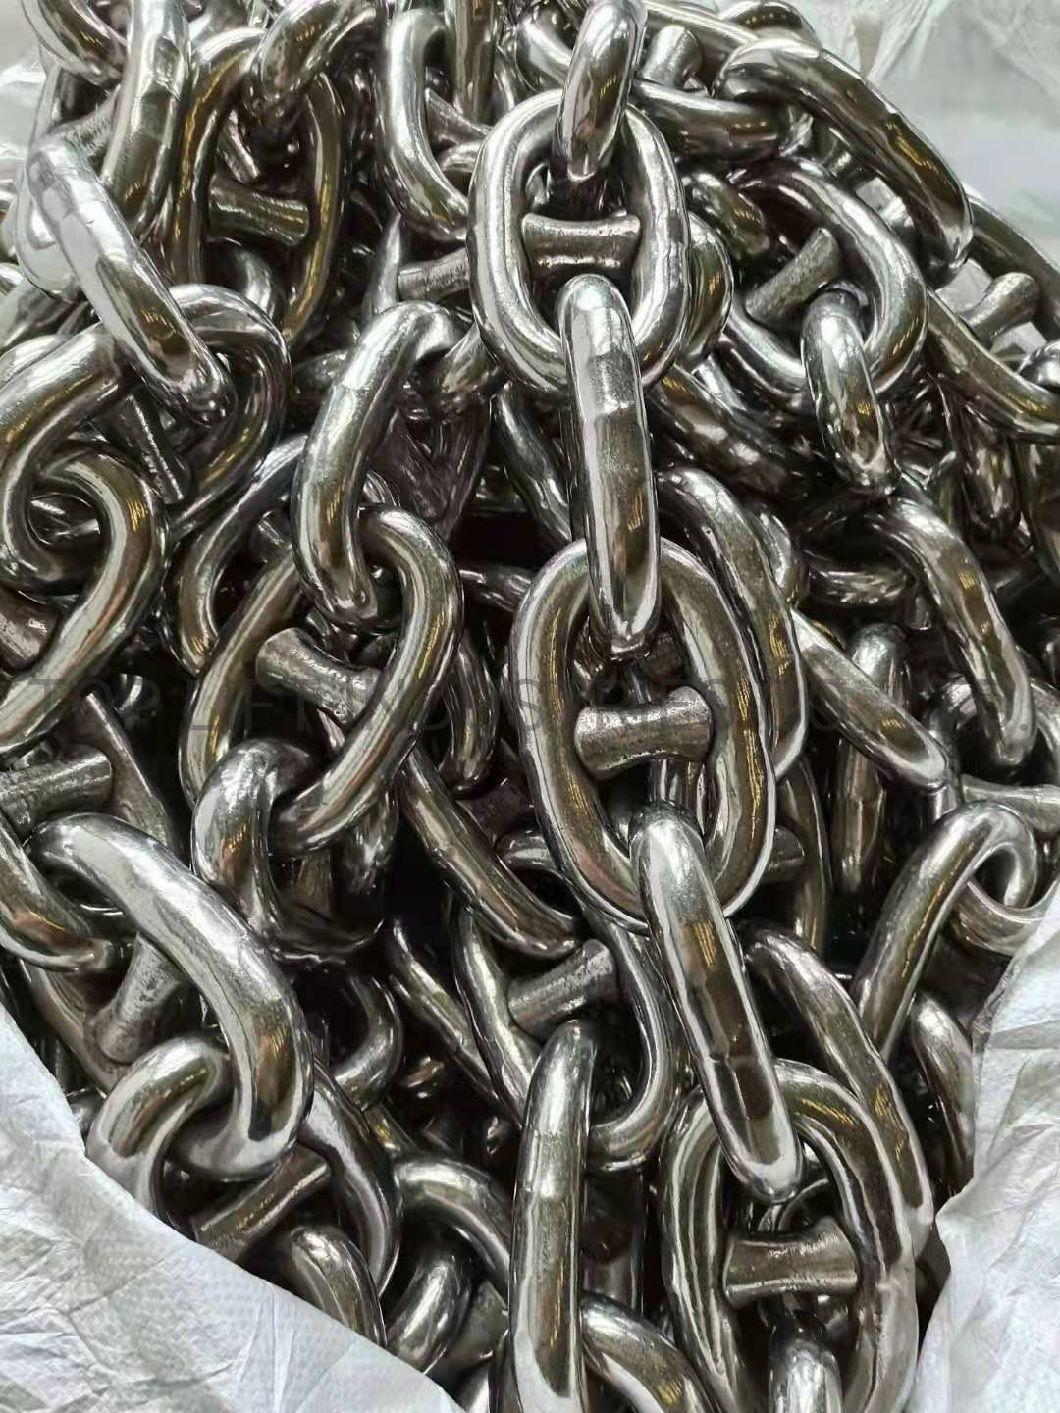 Grade 2 Hot Sales High Quality Stud Link Anchor Chain